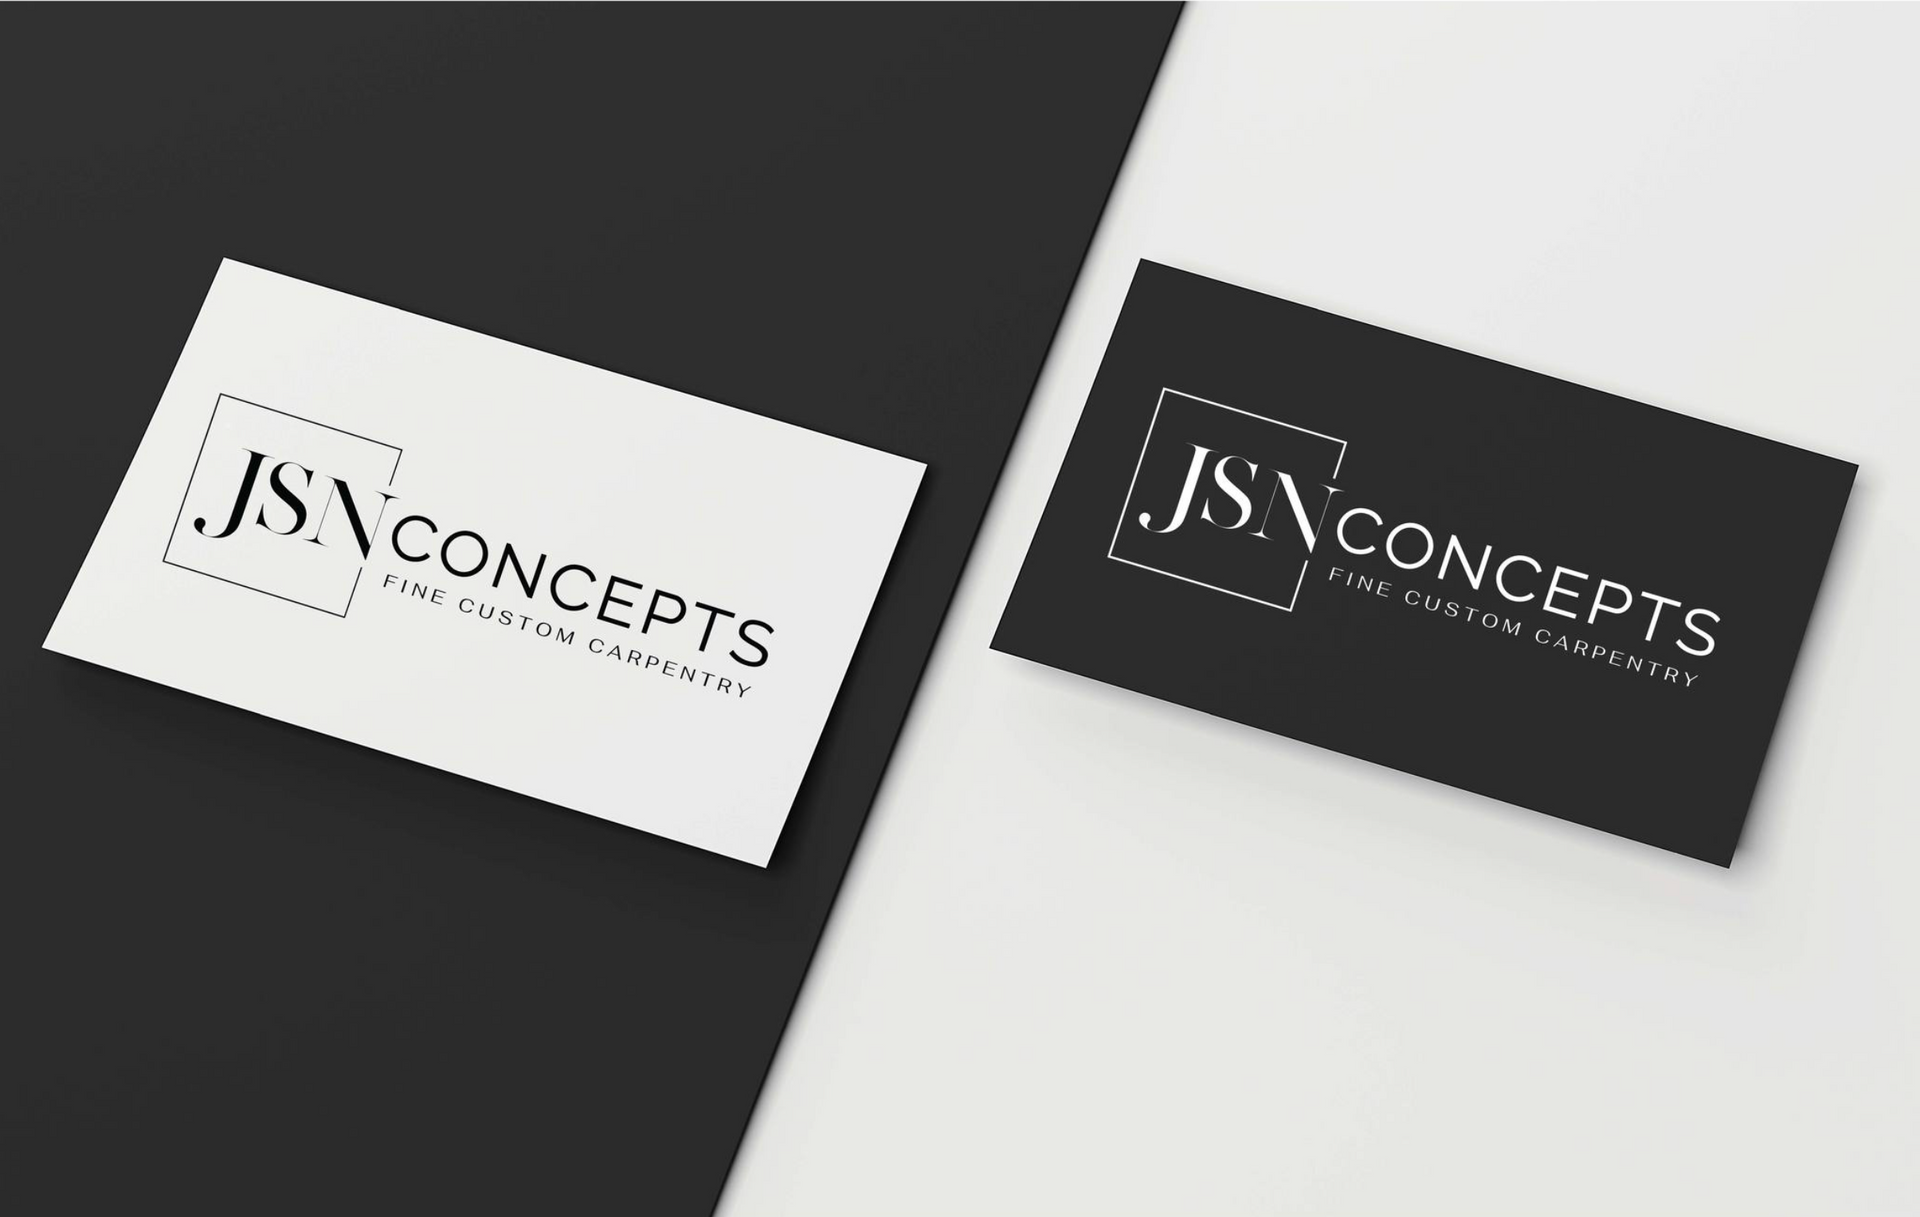 A picture showing a logo and business card.